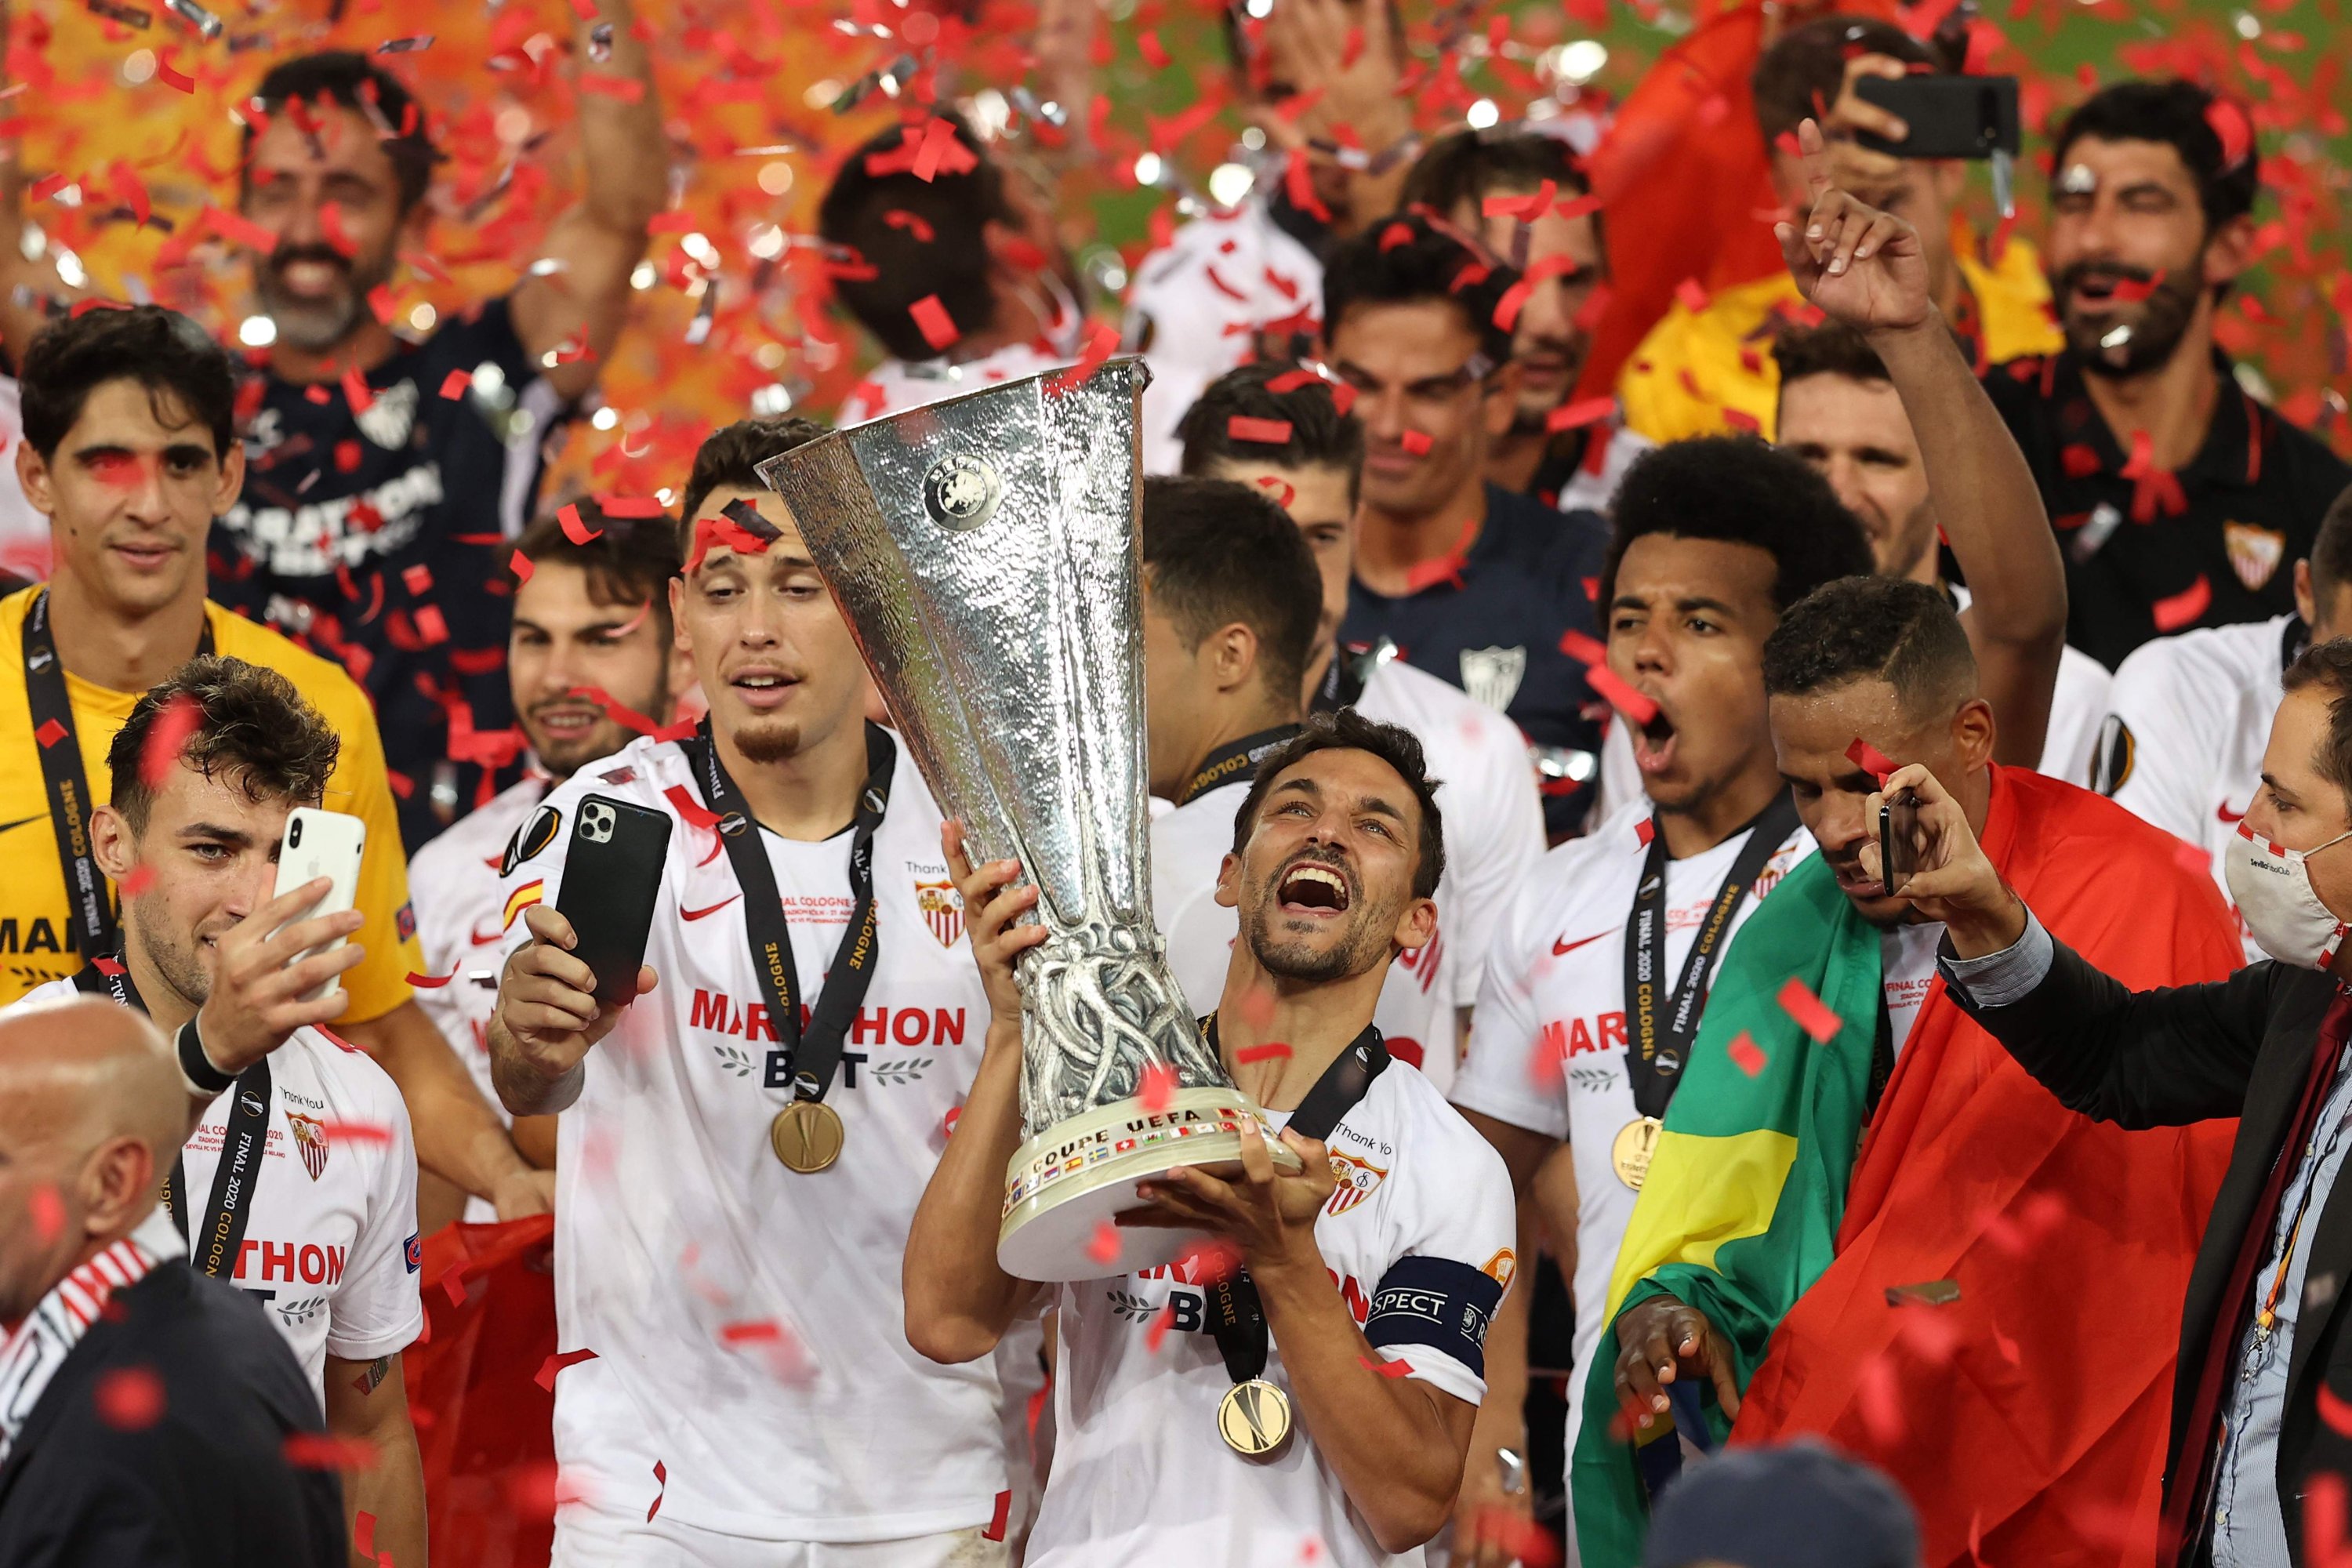  Sevilla players celebrate their victory in the 2020 UEFA Europa League final against Inter Milan.